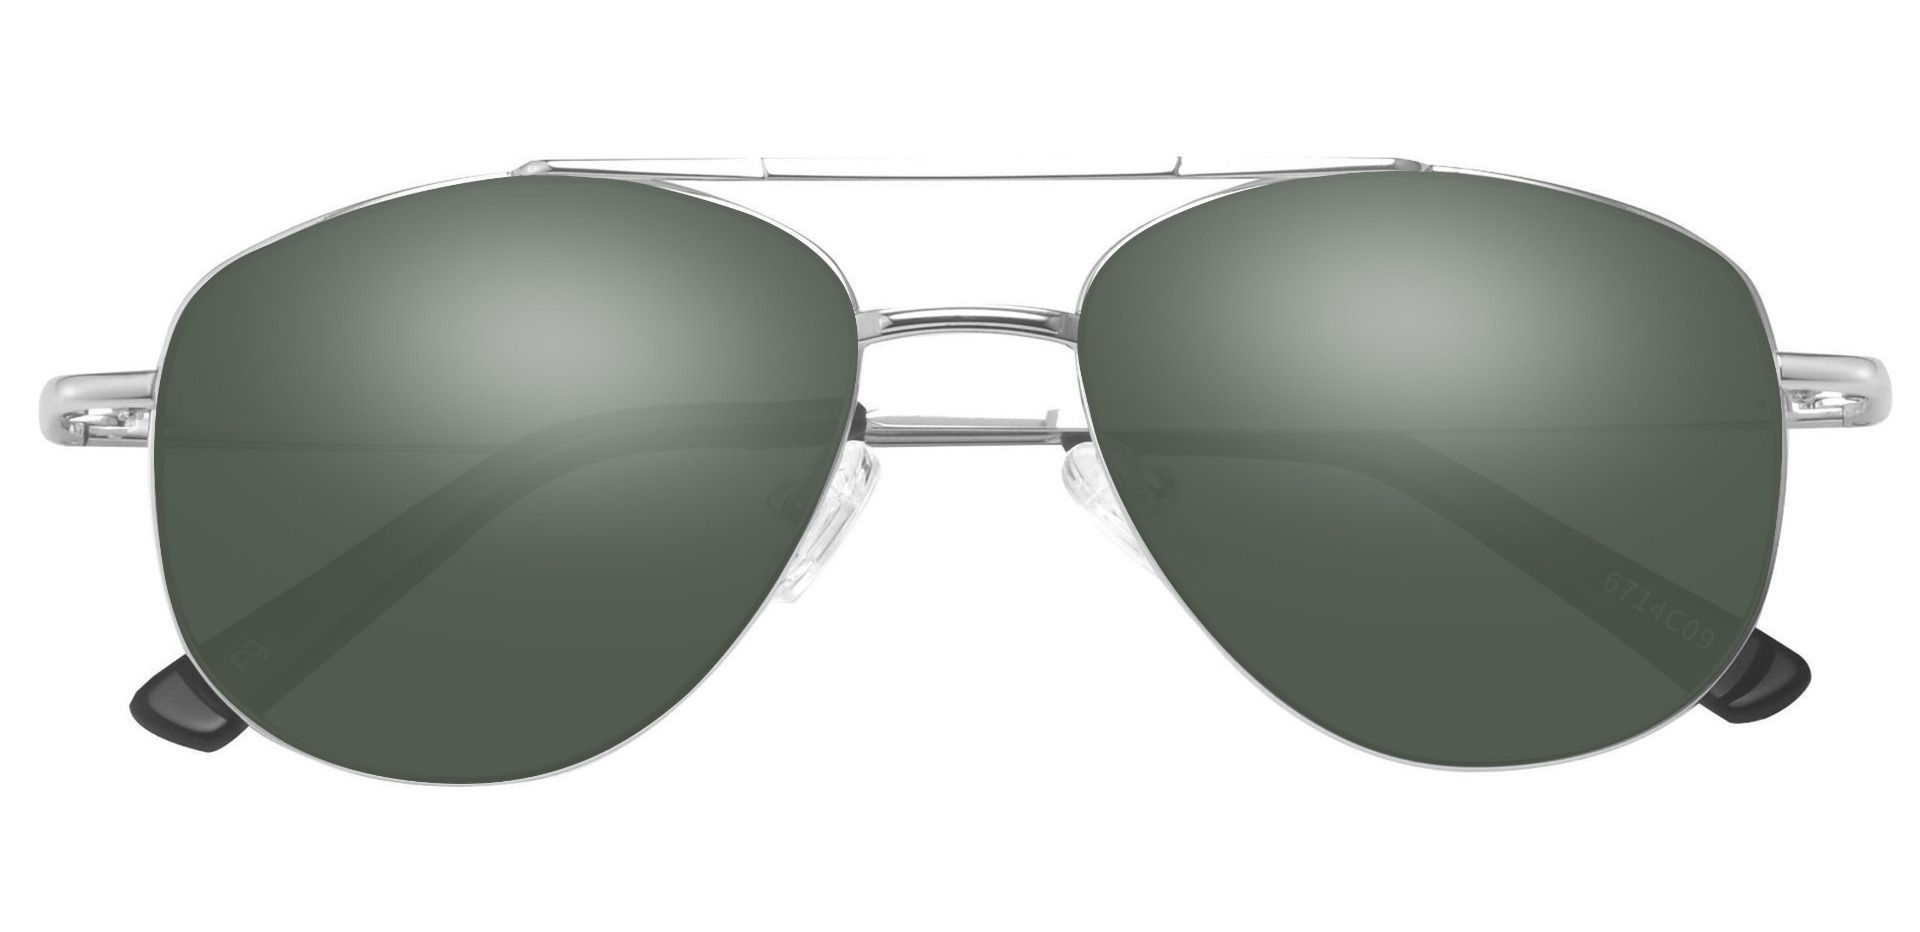 Dwight Aviator Prescription Sunglasses - Clear Frame With Green Lenses